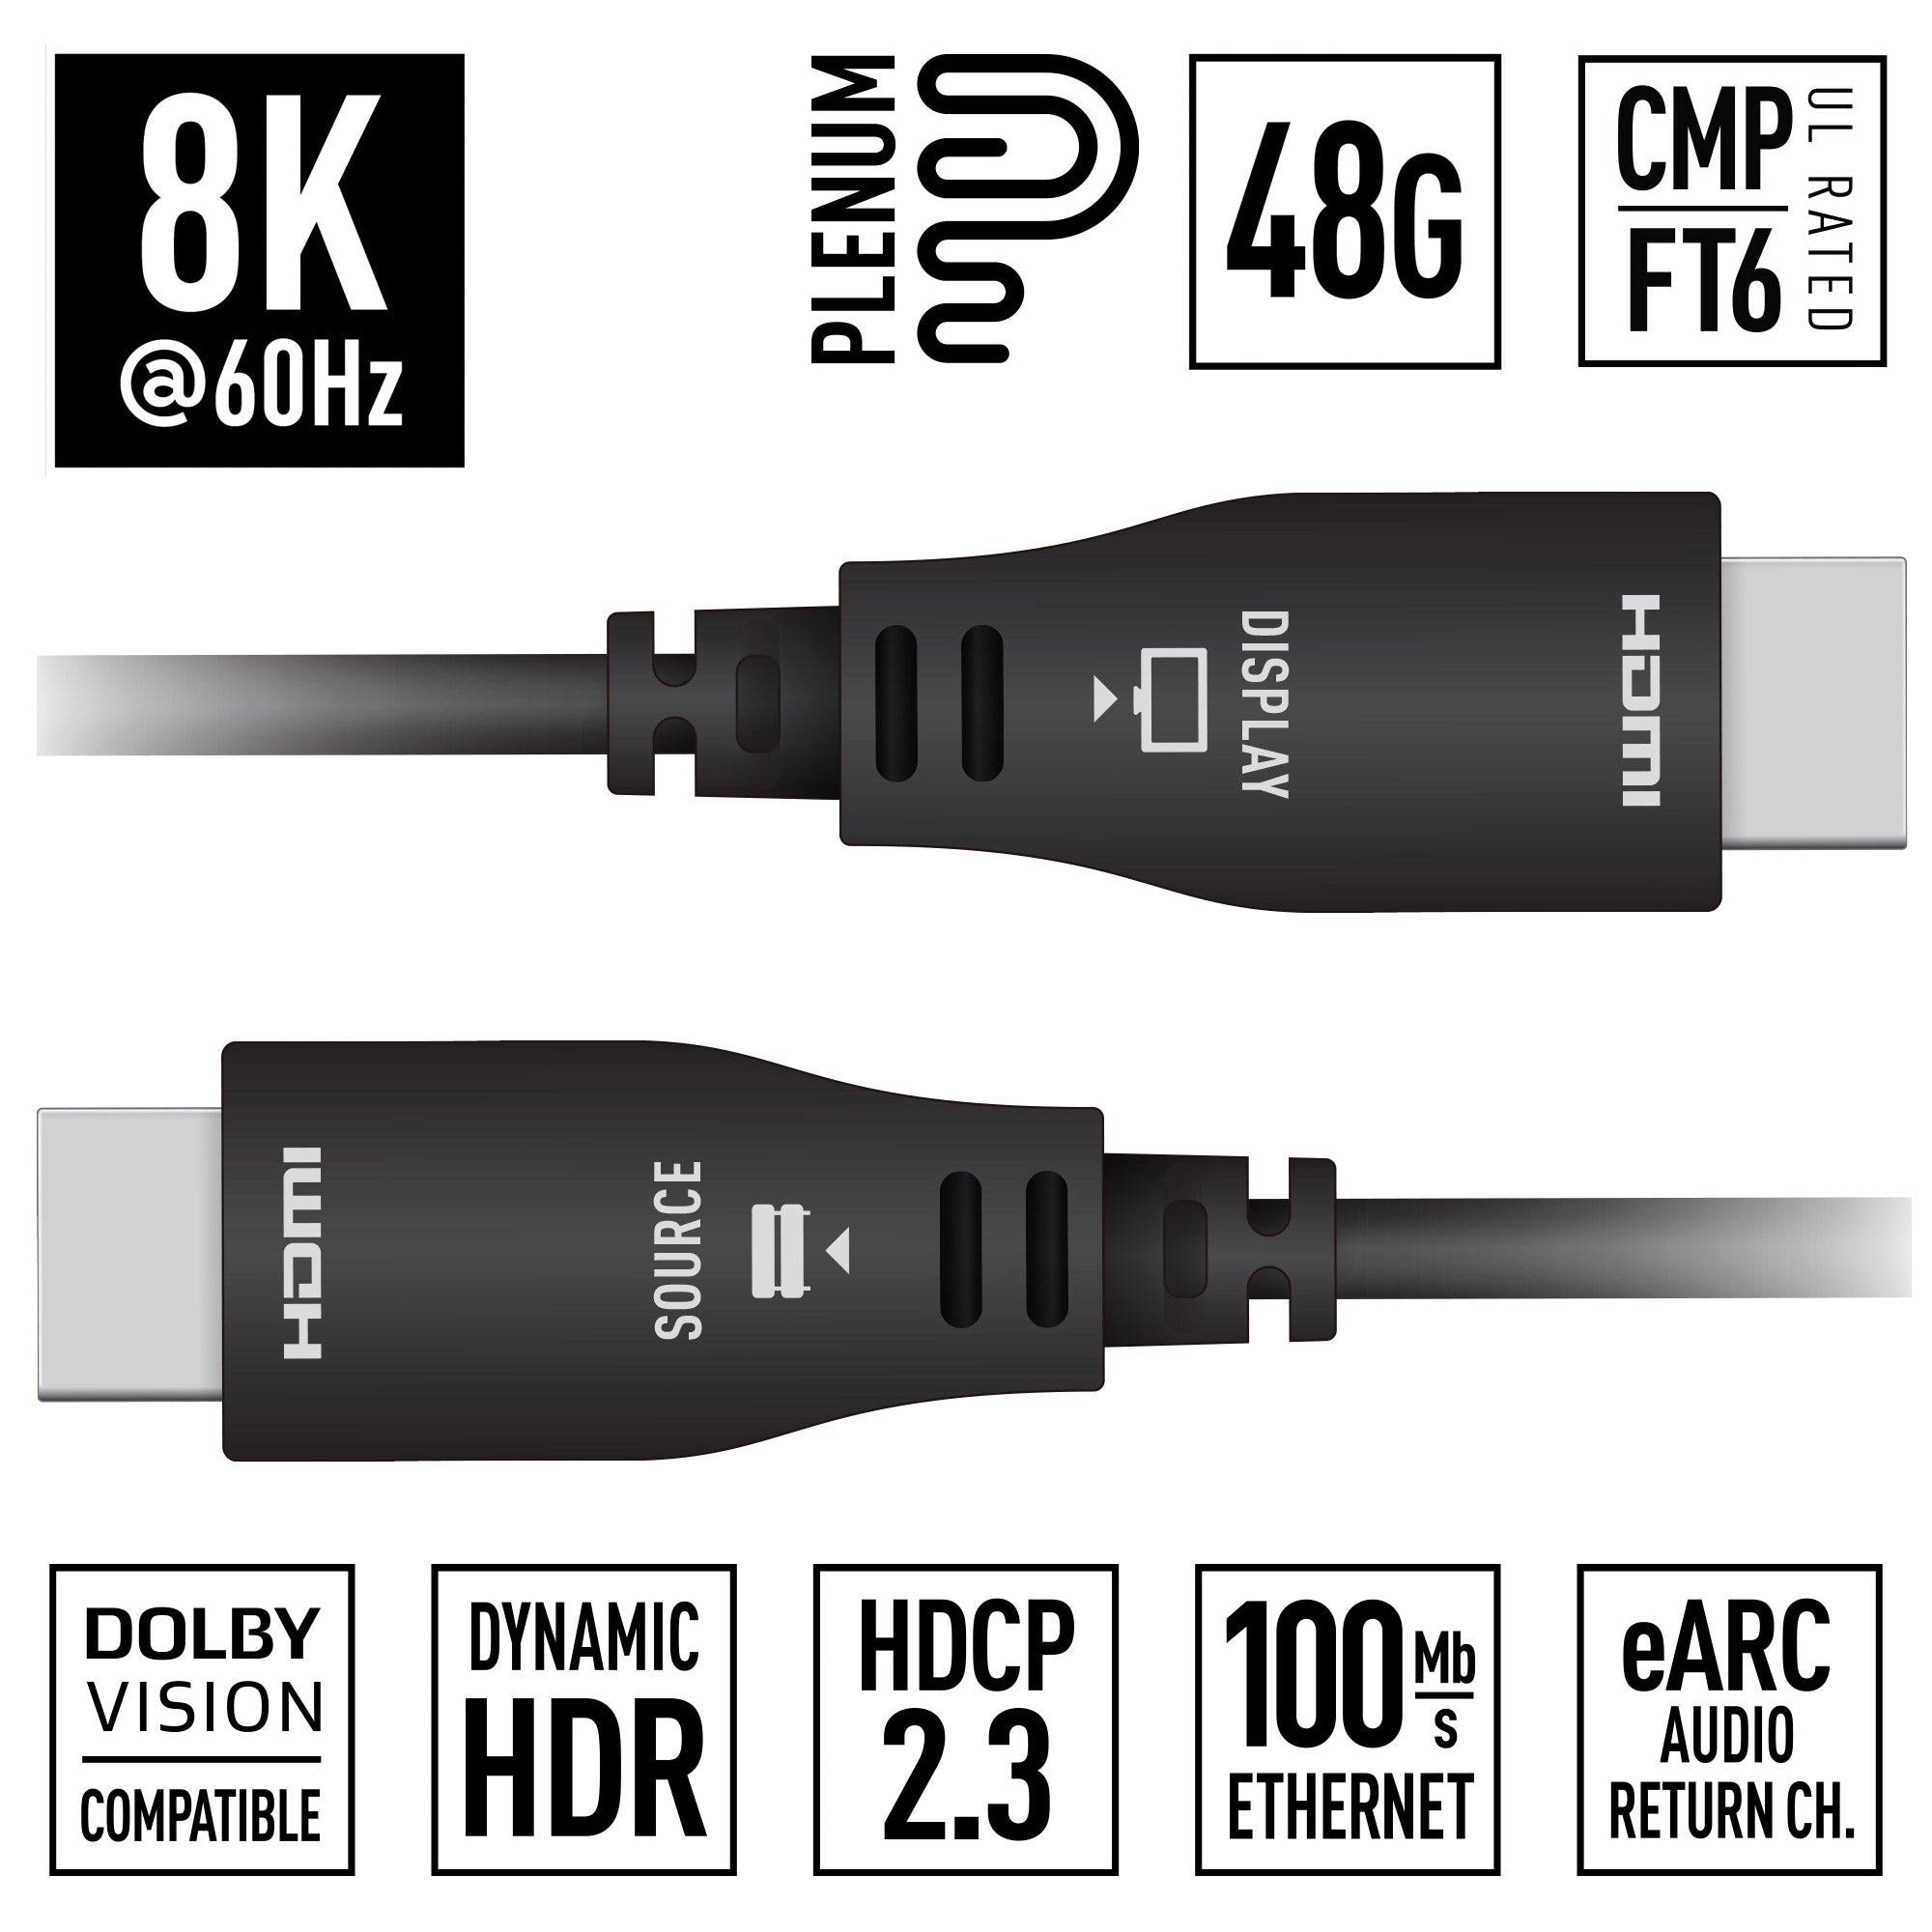 Key Digital 49FT (15M) 8K/48G Plenum Hybrid Fiber Optic Ultra High Speed HDMI Cable. Supports Dynamic HDR, Dolby® Vision, HDCP2.3, eARC, CMP / FT6 UL Rated - KD-AOCH49P